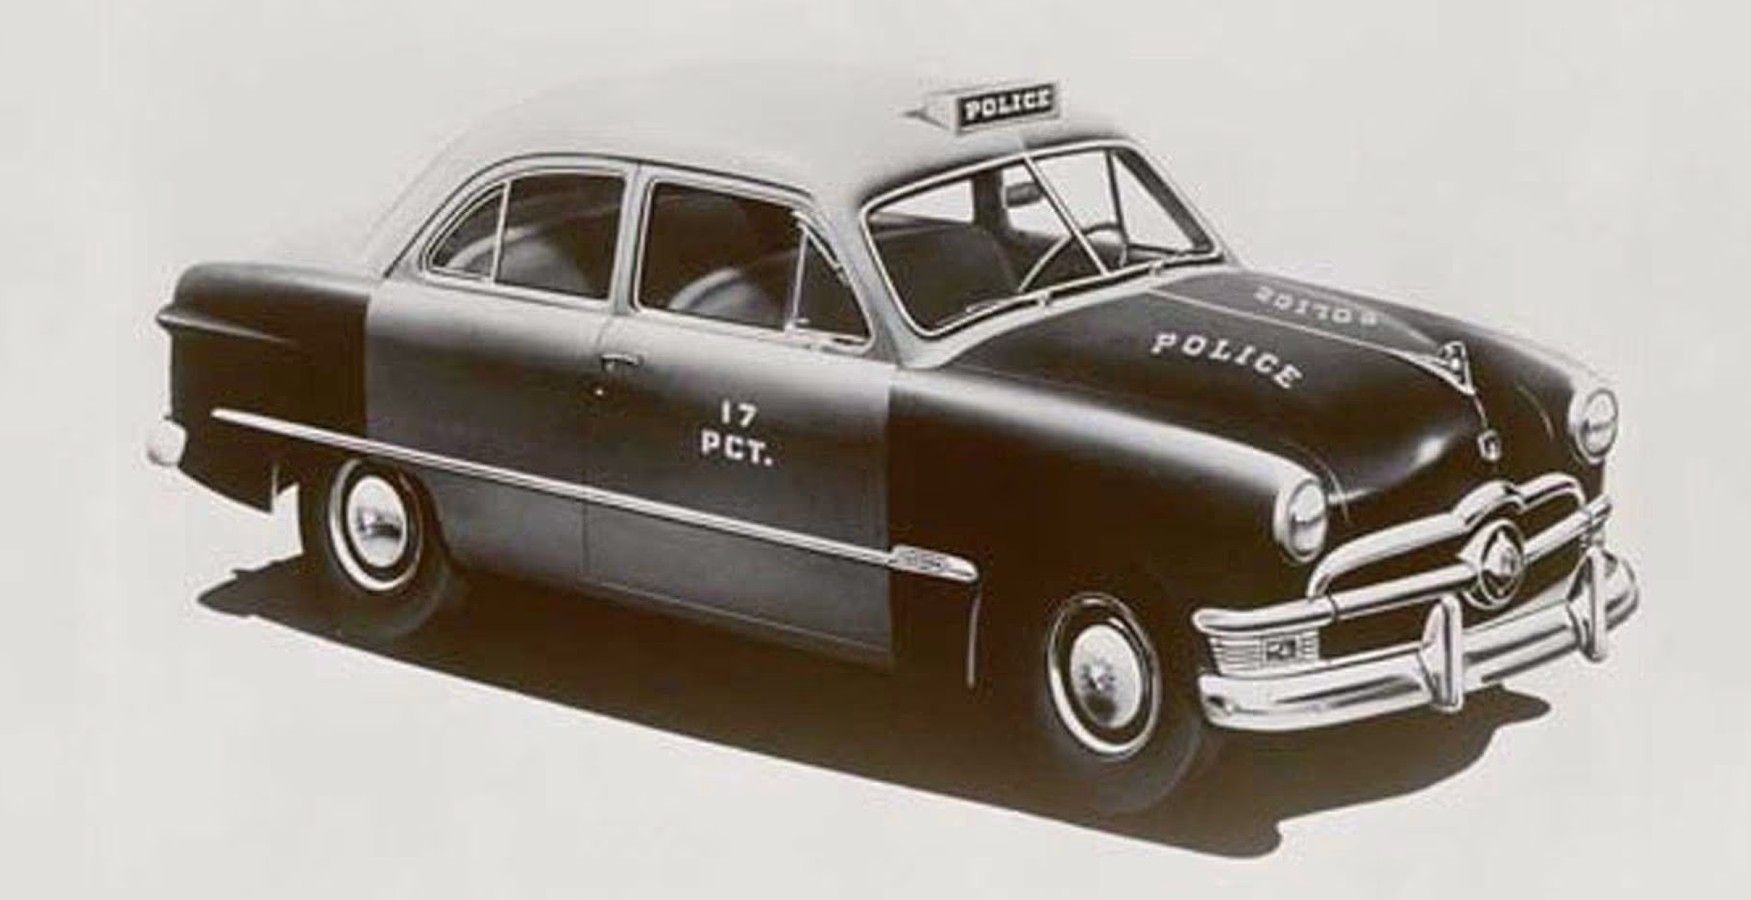 Ford's First Police Car in 1950